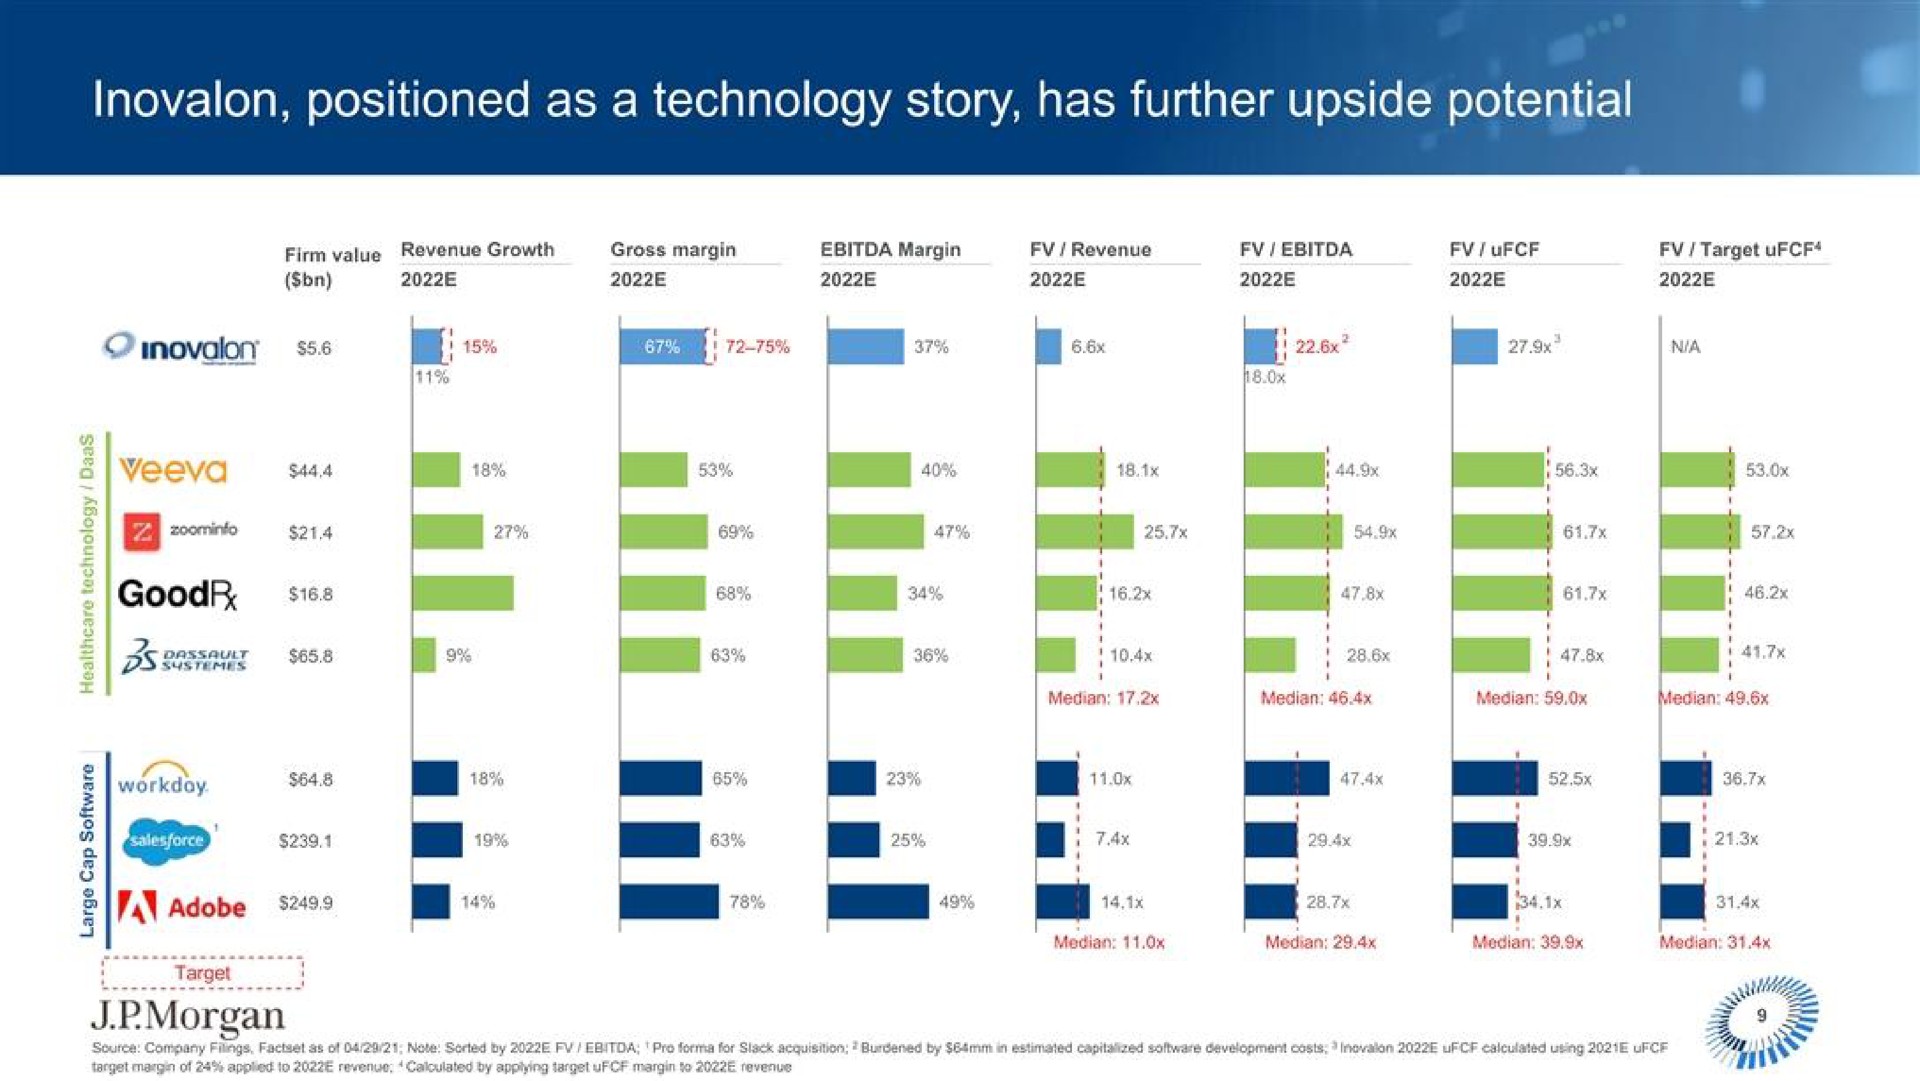 positioned as a technology story has further upside potential a | J.P.Morgan